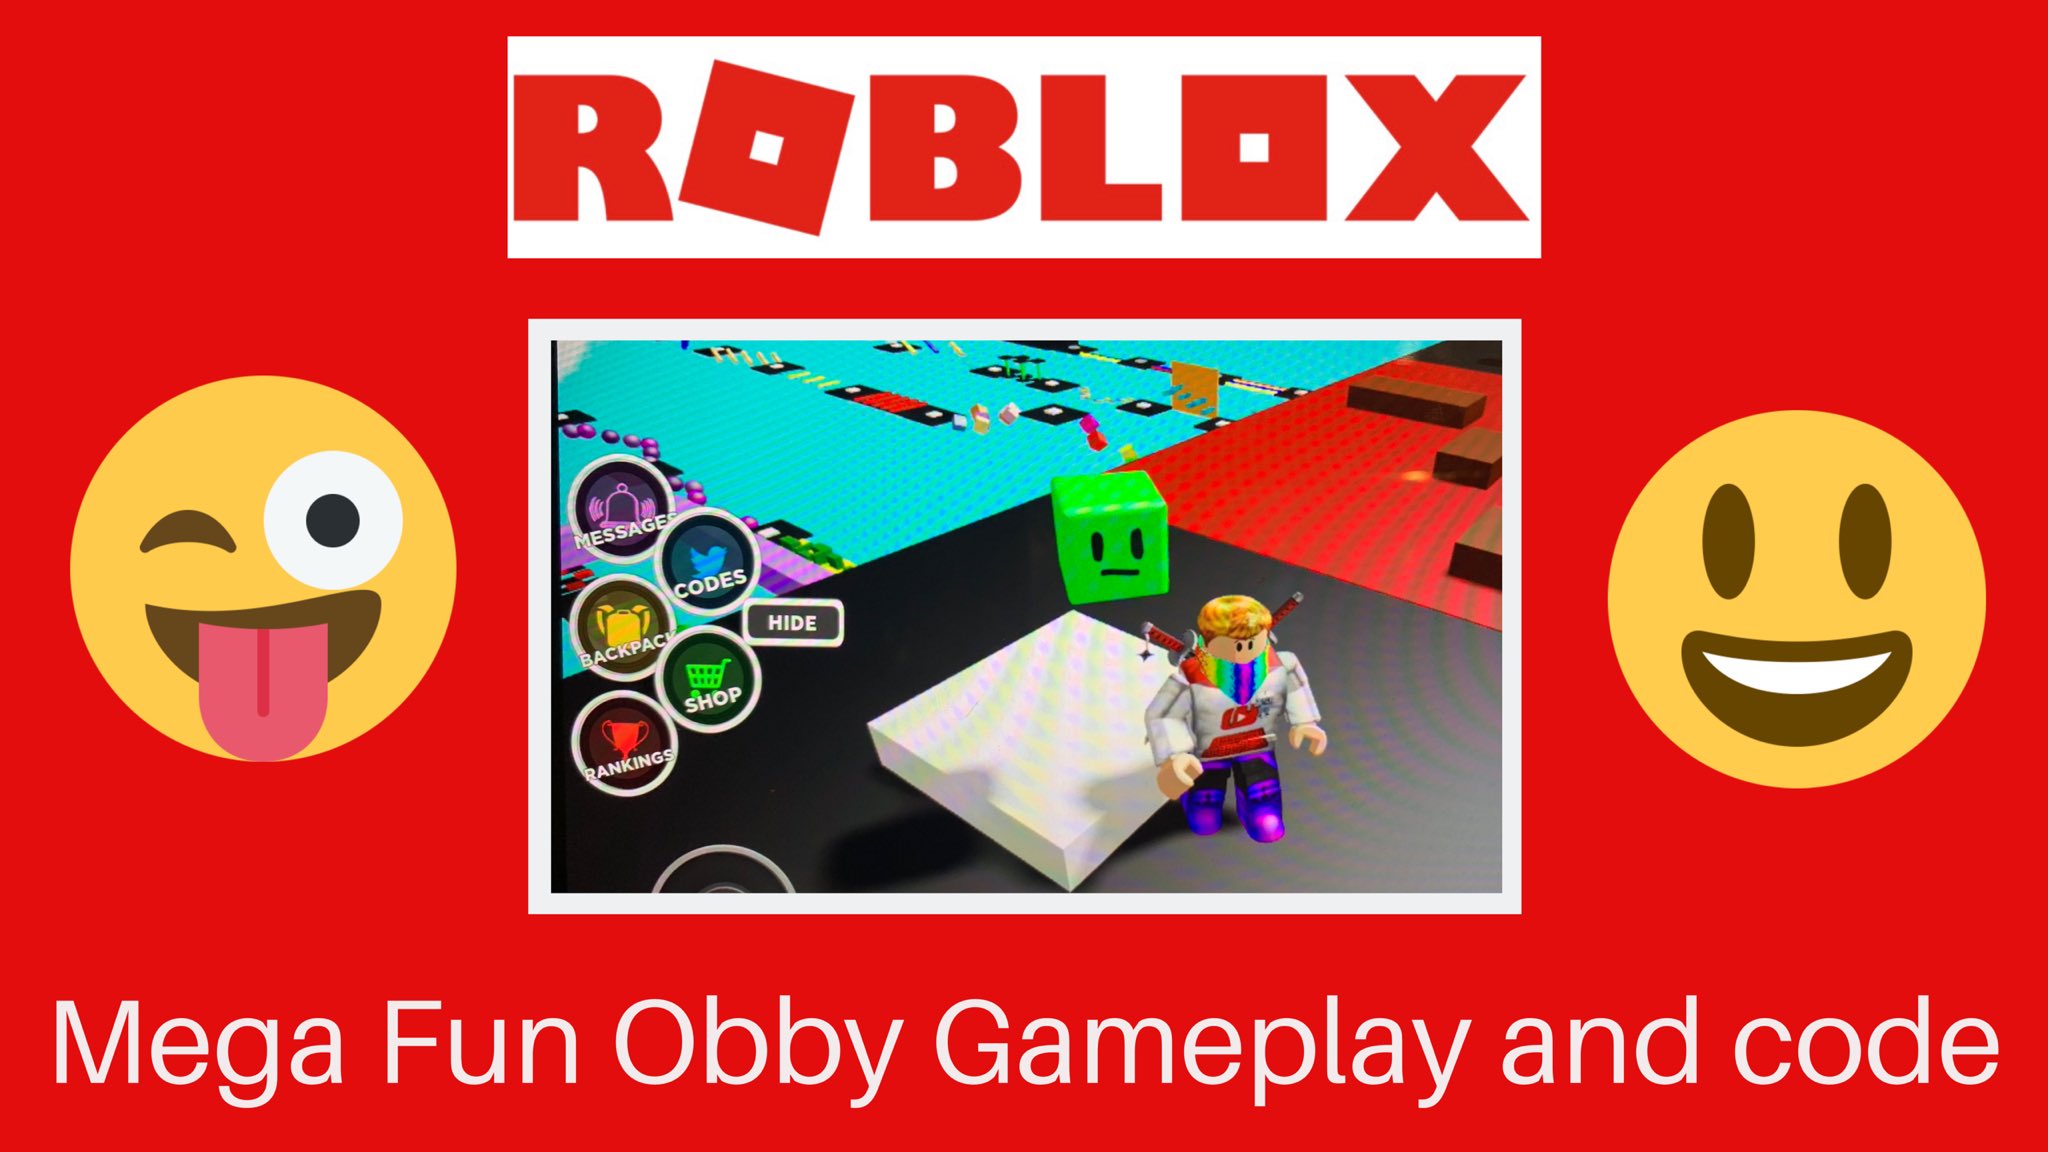 Deathbotbrothers On Twitter Roblox Mega Fun Obby Gameplay And Code Gameplay Talk Through And A Co Https T Co Qcyqb3ibze Via Youtube Roblox Megafunobby Robloxmegafunobby Robloxcode Robloxgameplay Robloxgames Https T Co Hdiriznsxu - roblox mega fun obby has a another new code youtube